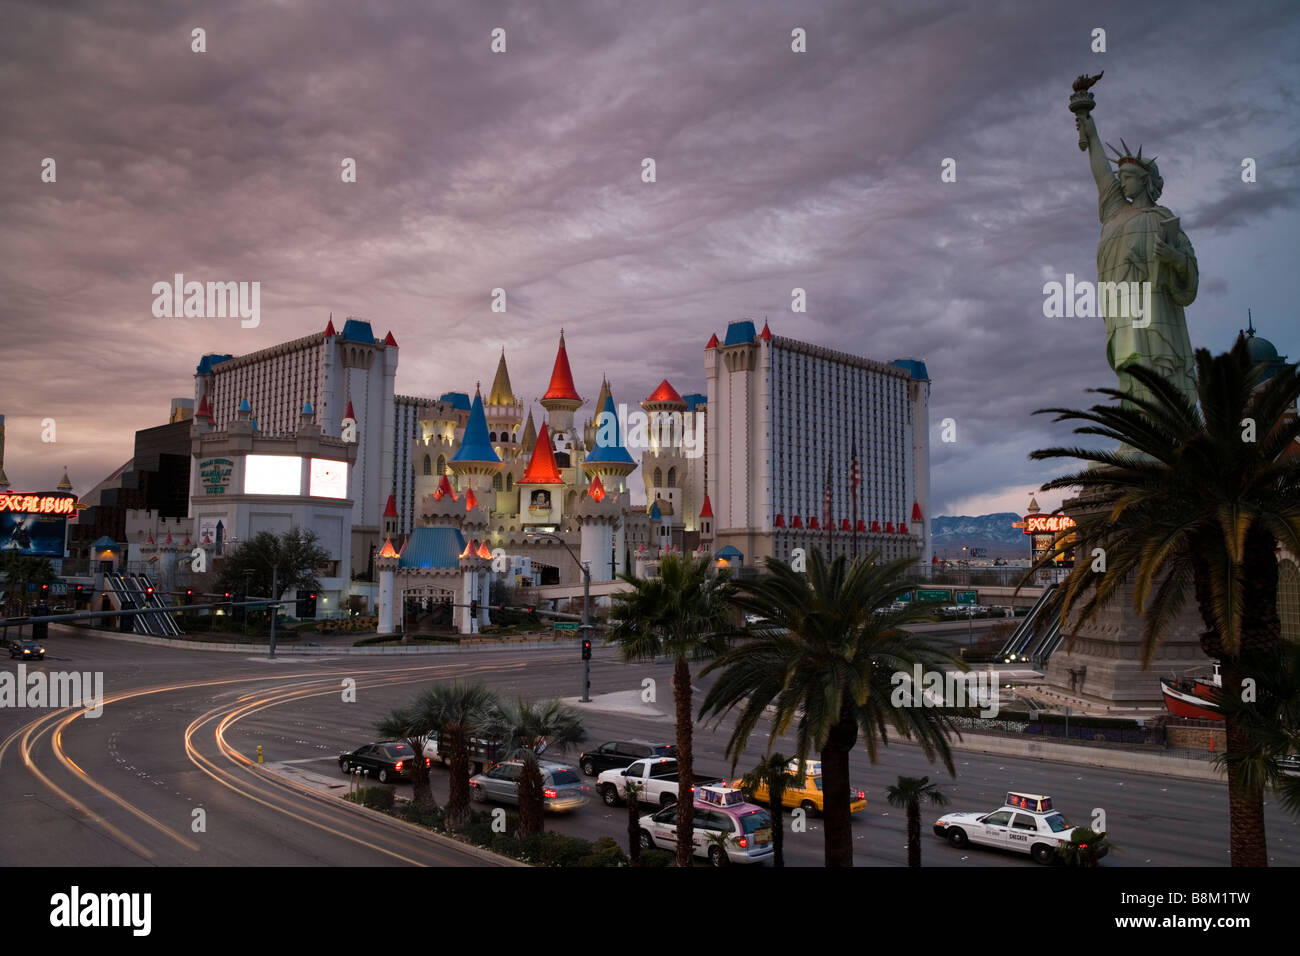 Dark clouds over the Statue Of Liberty and the Excalibur Hotel and casino on the Las Vegas strip, Nevada, USA Stock Photo